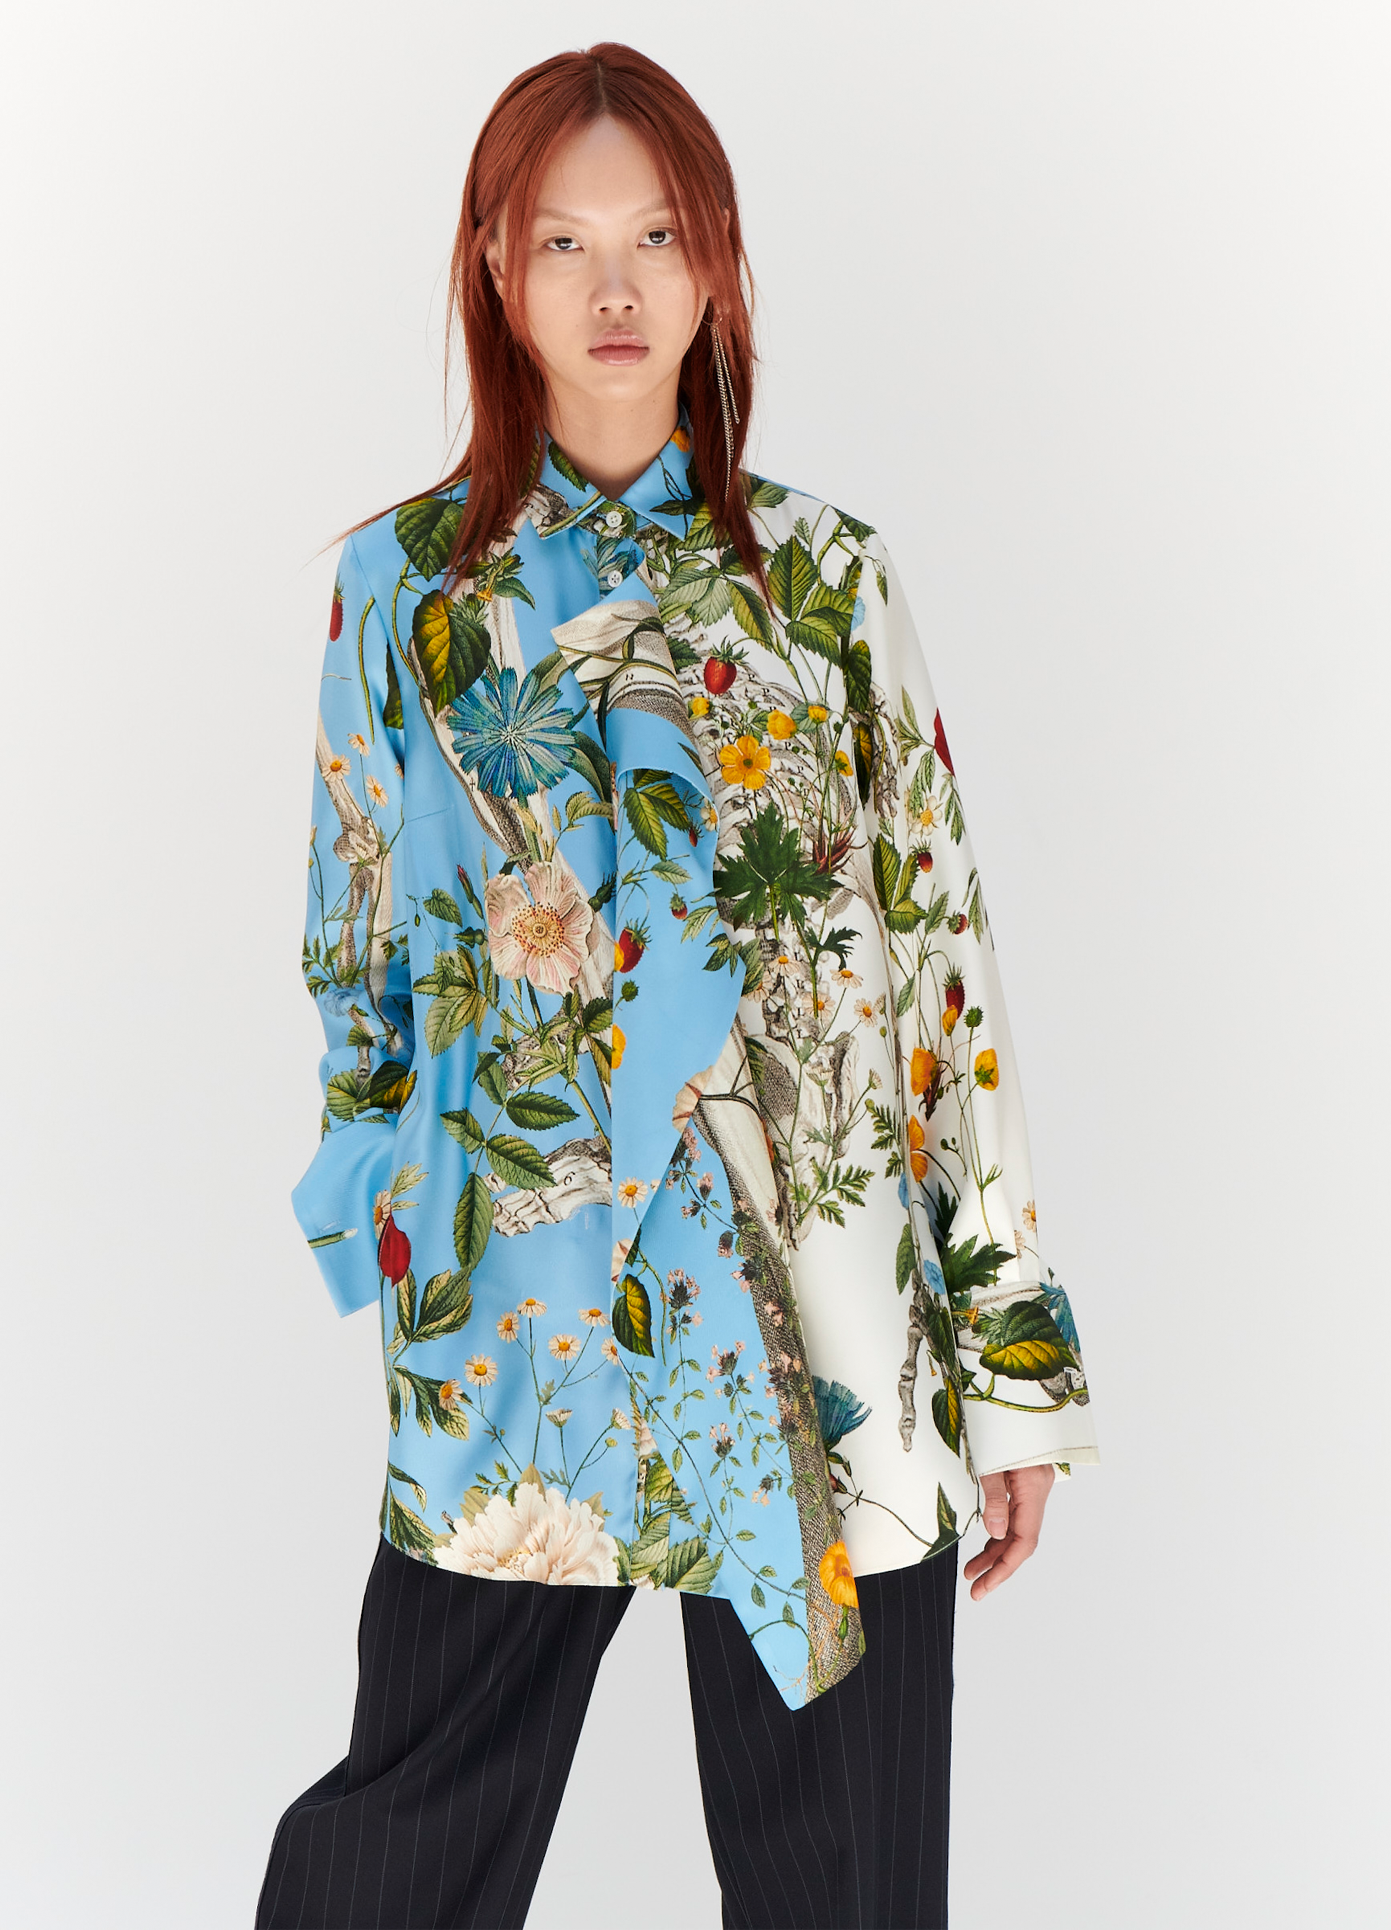 MONSE Floral Skeleton Combo Print Blouse in Blue and Ivory Multi on model front view